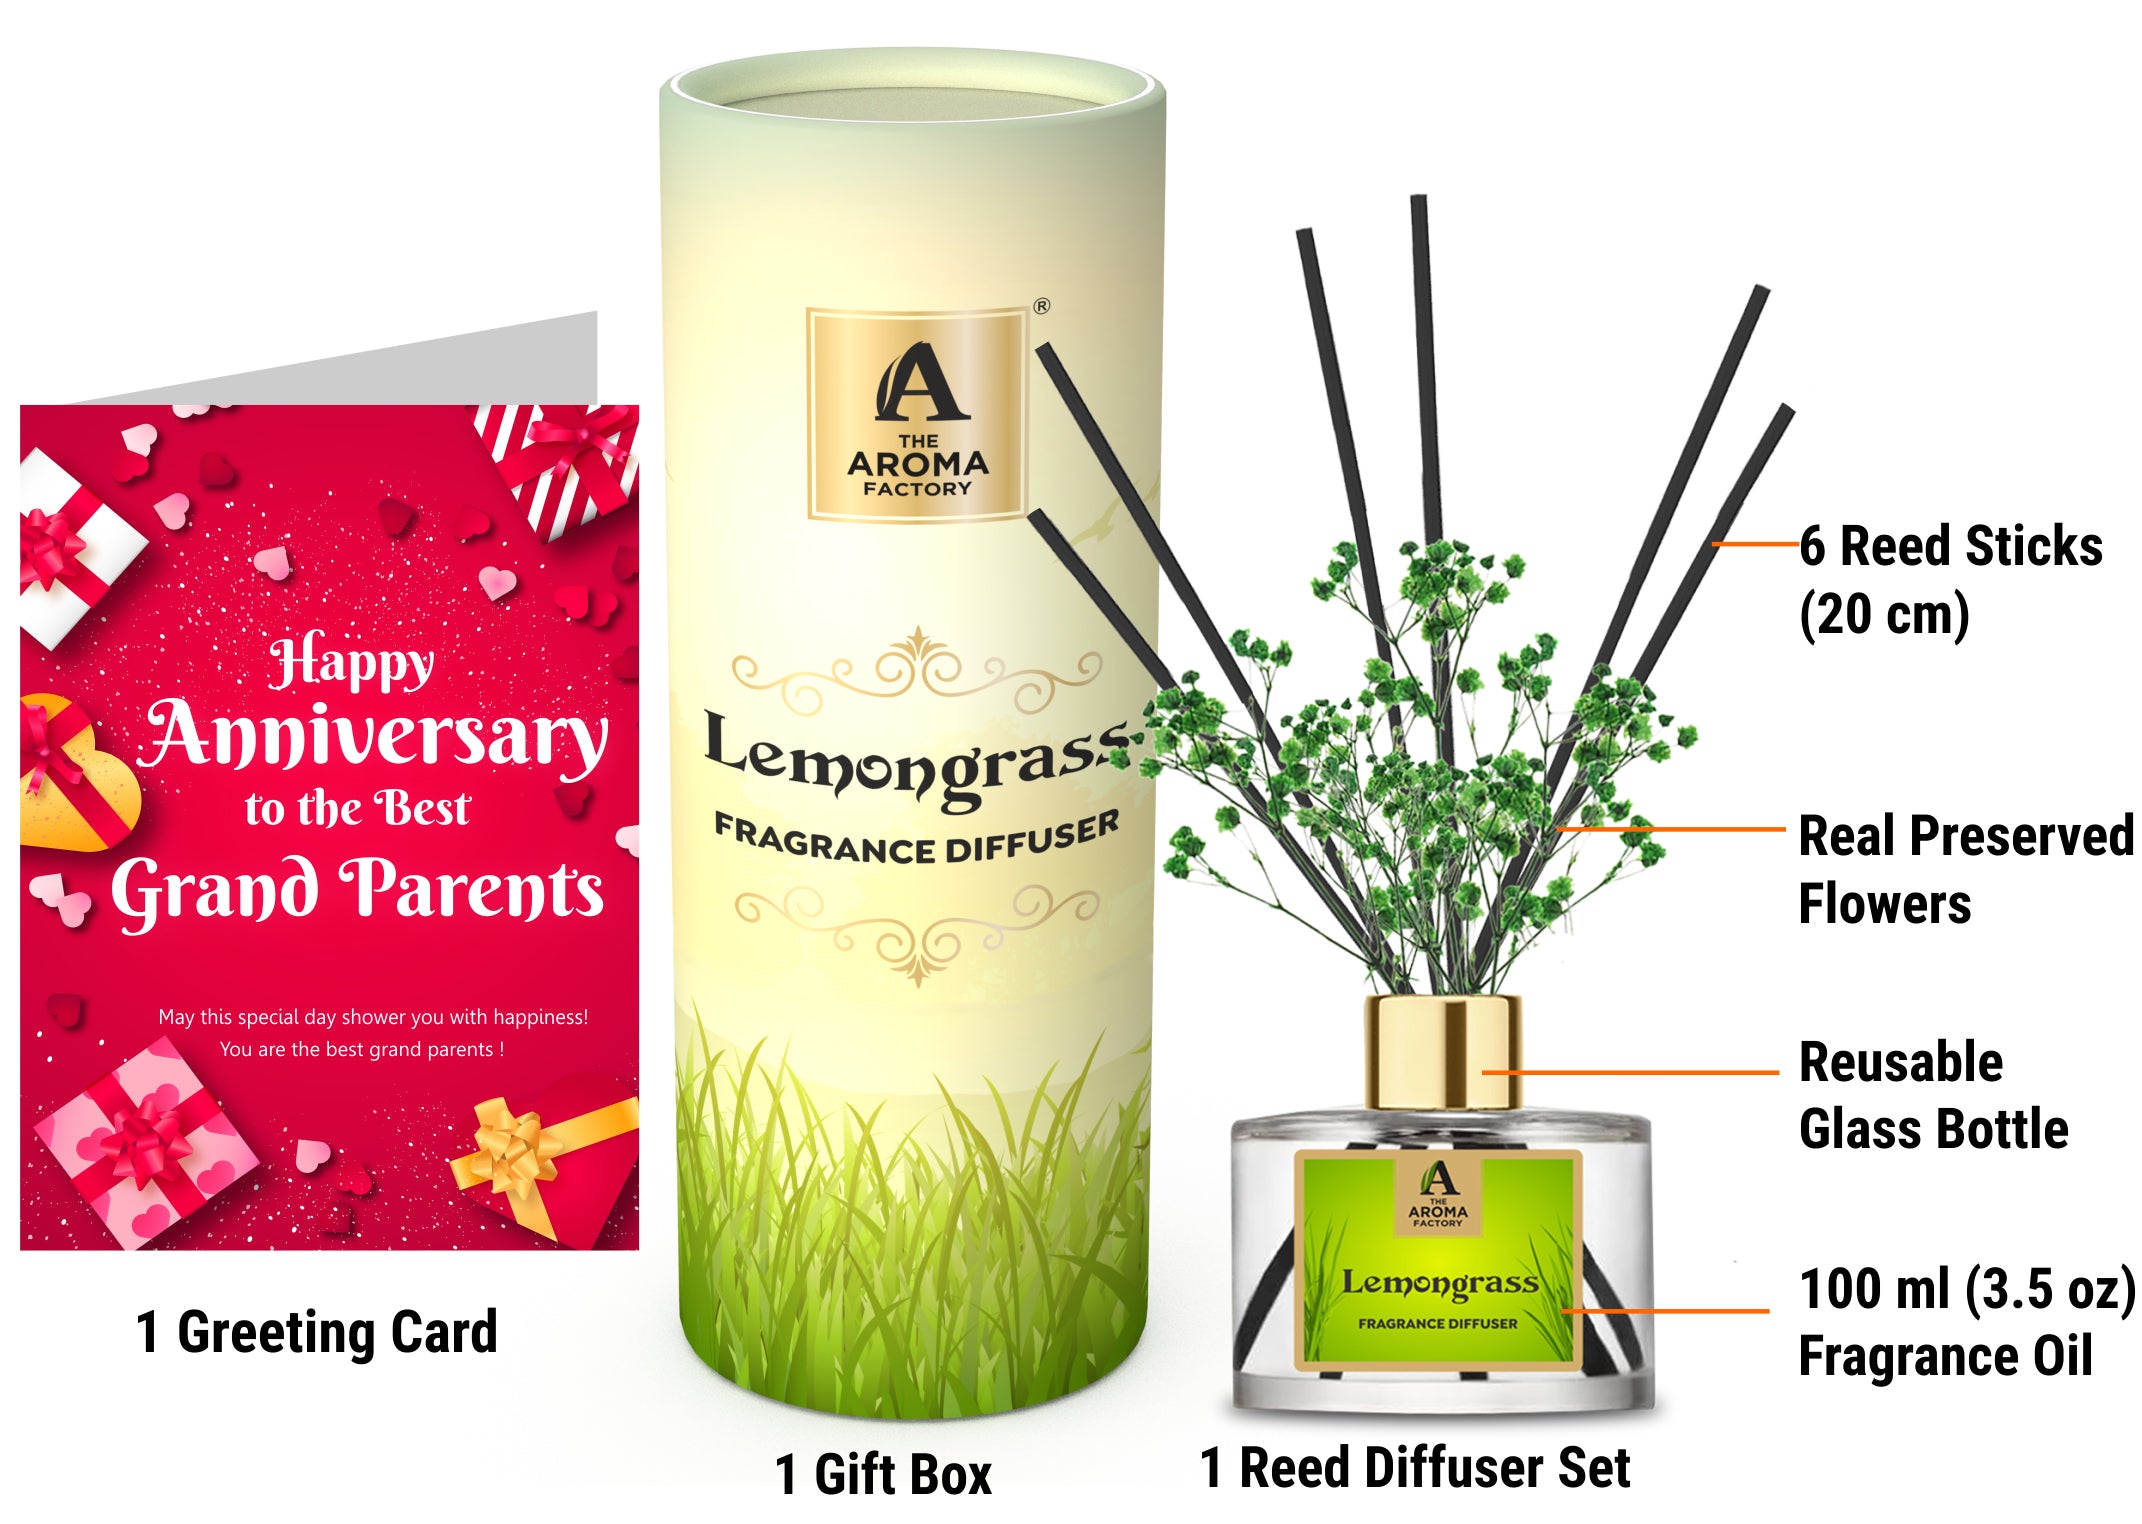 The Aroma Factory Happy Anniversary Dada Dadi Grand Parents Gift with Card, Lemongrass Fragrance Reed Diffuser Set (1 Box + 1 Card)